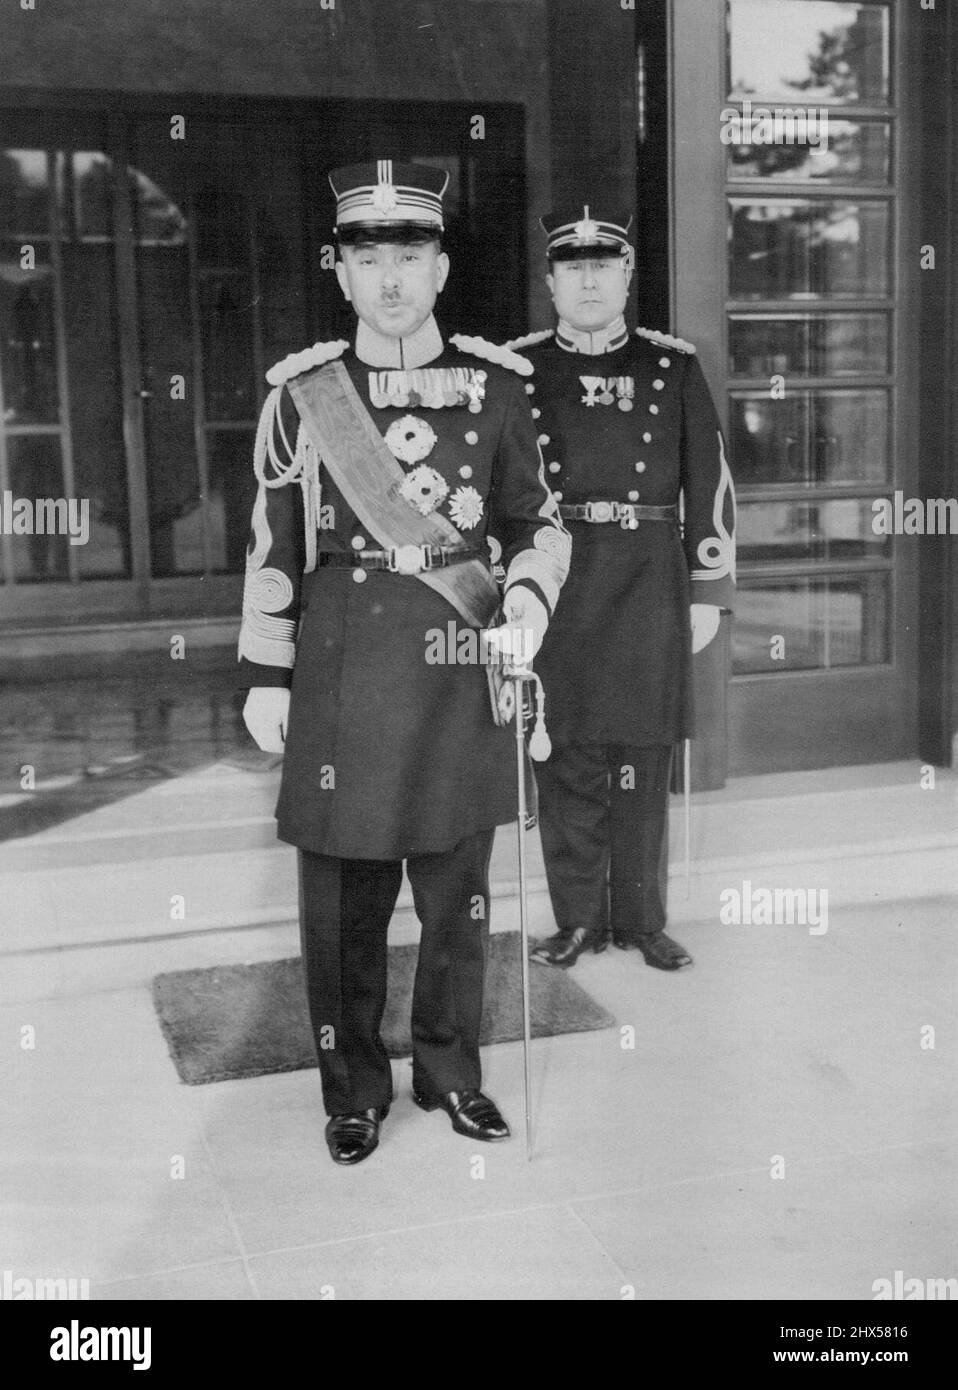 H.I.H. Prince Asaka.... H.I.H. Prince Yasuhiko Asaka, seen here, was appointed by his Majesty the Emperor to member of the War Council this morning. The photo was taken as proceeding to the Imperial Palace for instalating ceremony, at his residence. March 14, 1938. (Photo by The Domei News Photos Service). Stock Photo